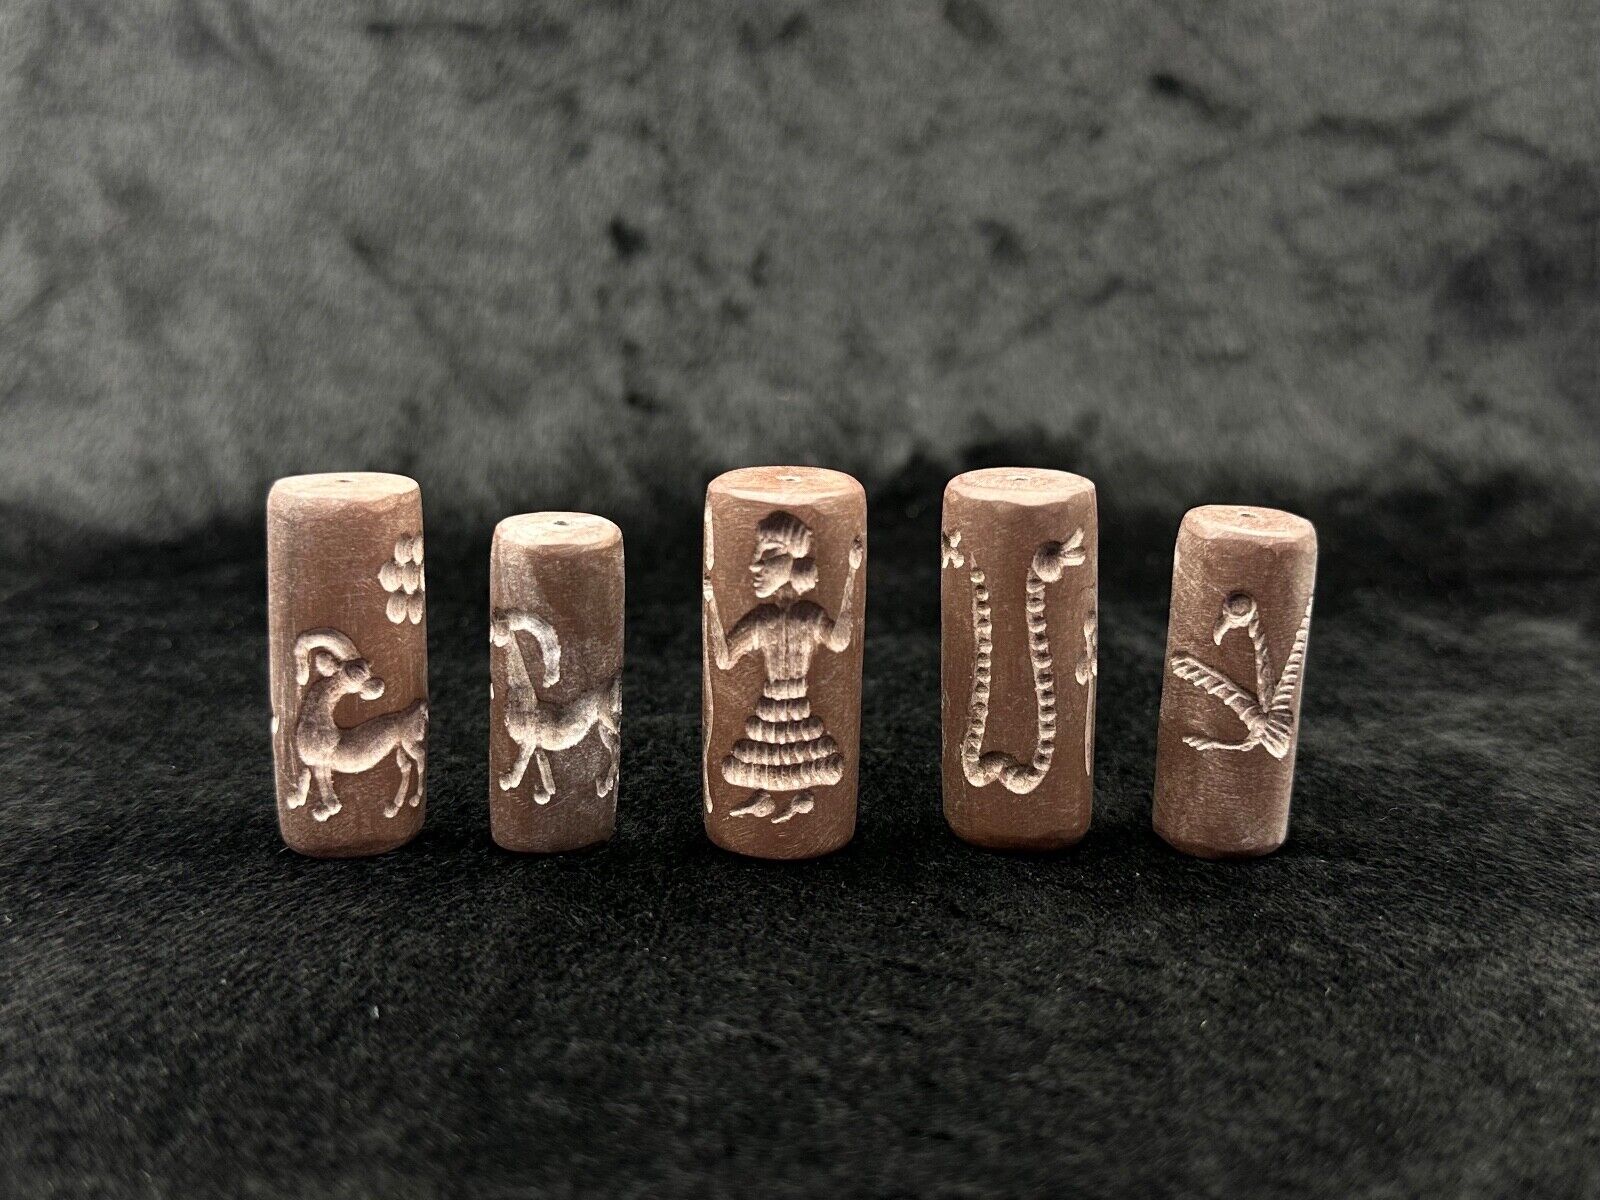 Beautiful 5 Pieces Lot Ancient Near Eastern Genuine Stone Cylinder Seals Beads